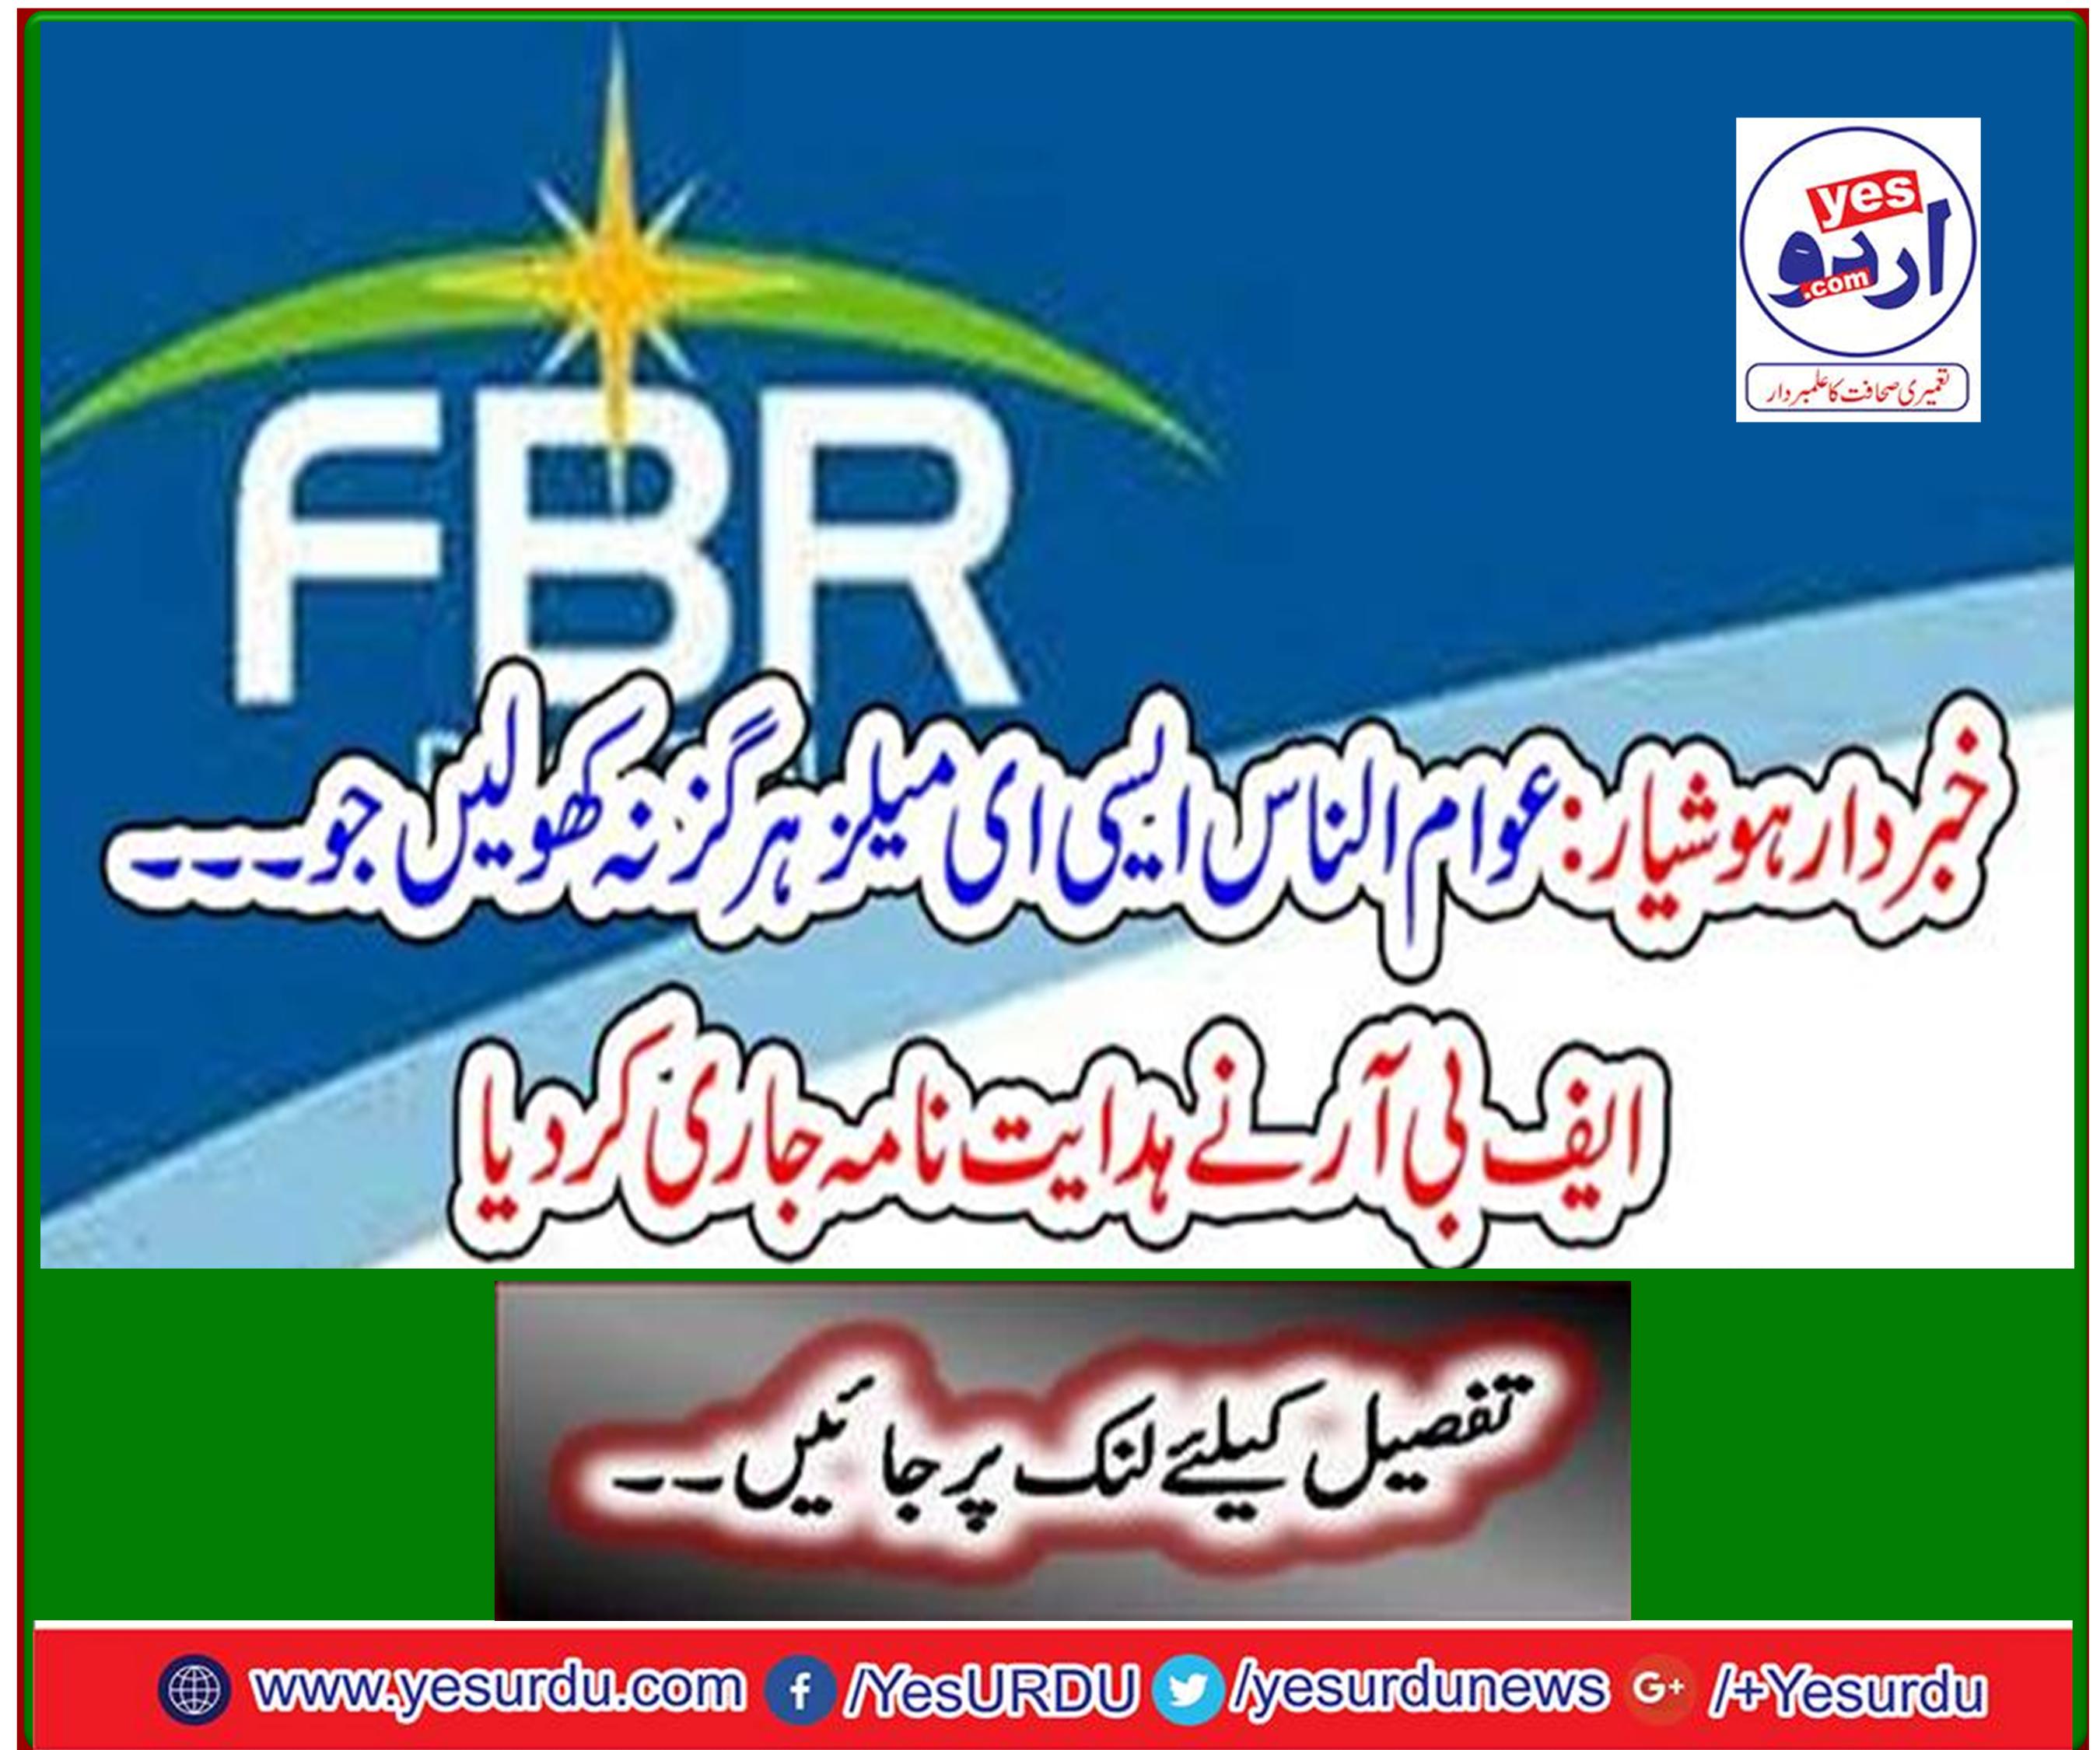 Warning: Never open emails that are open to the public. The FBR issued the directive